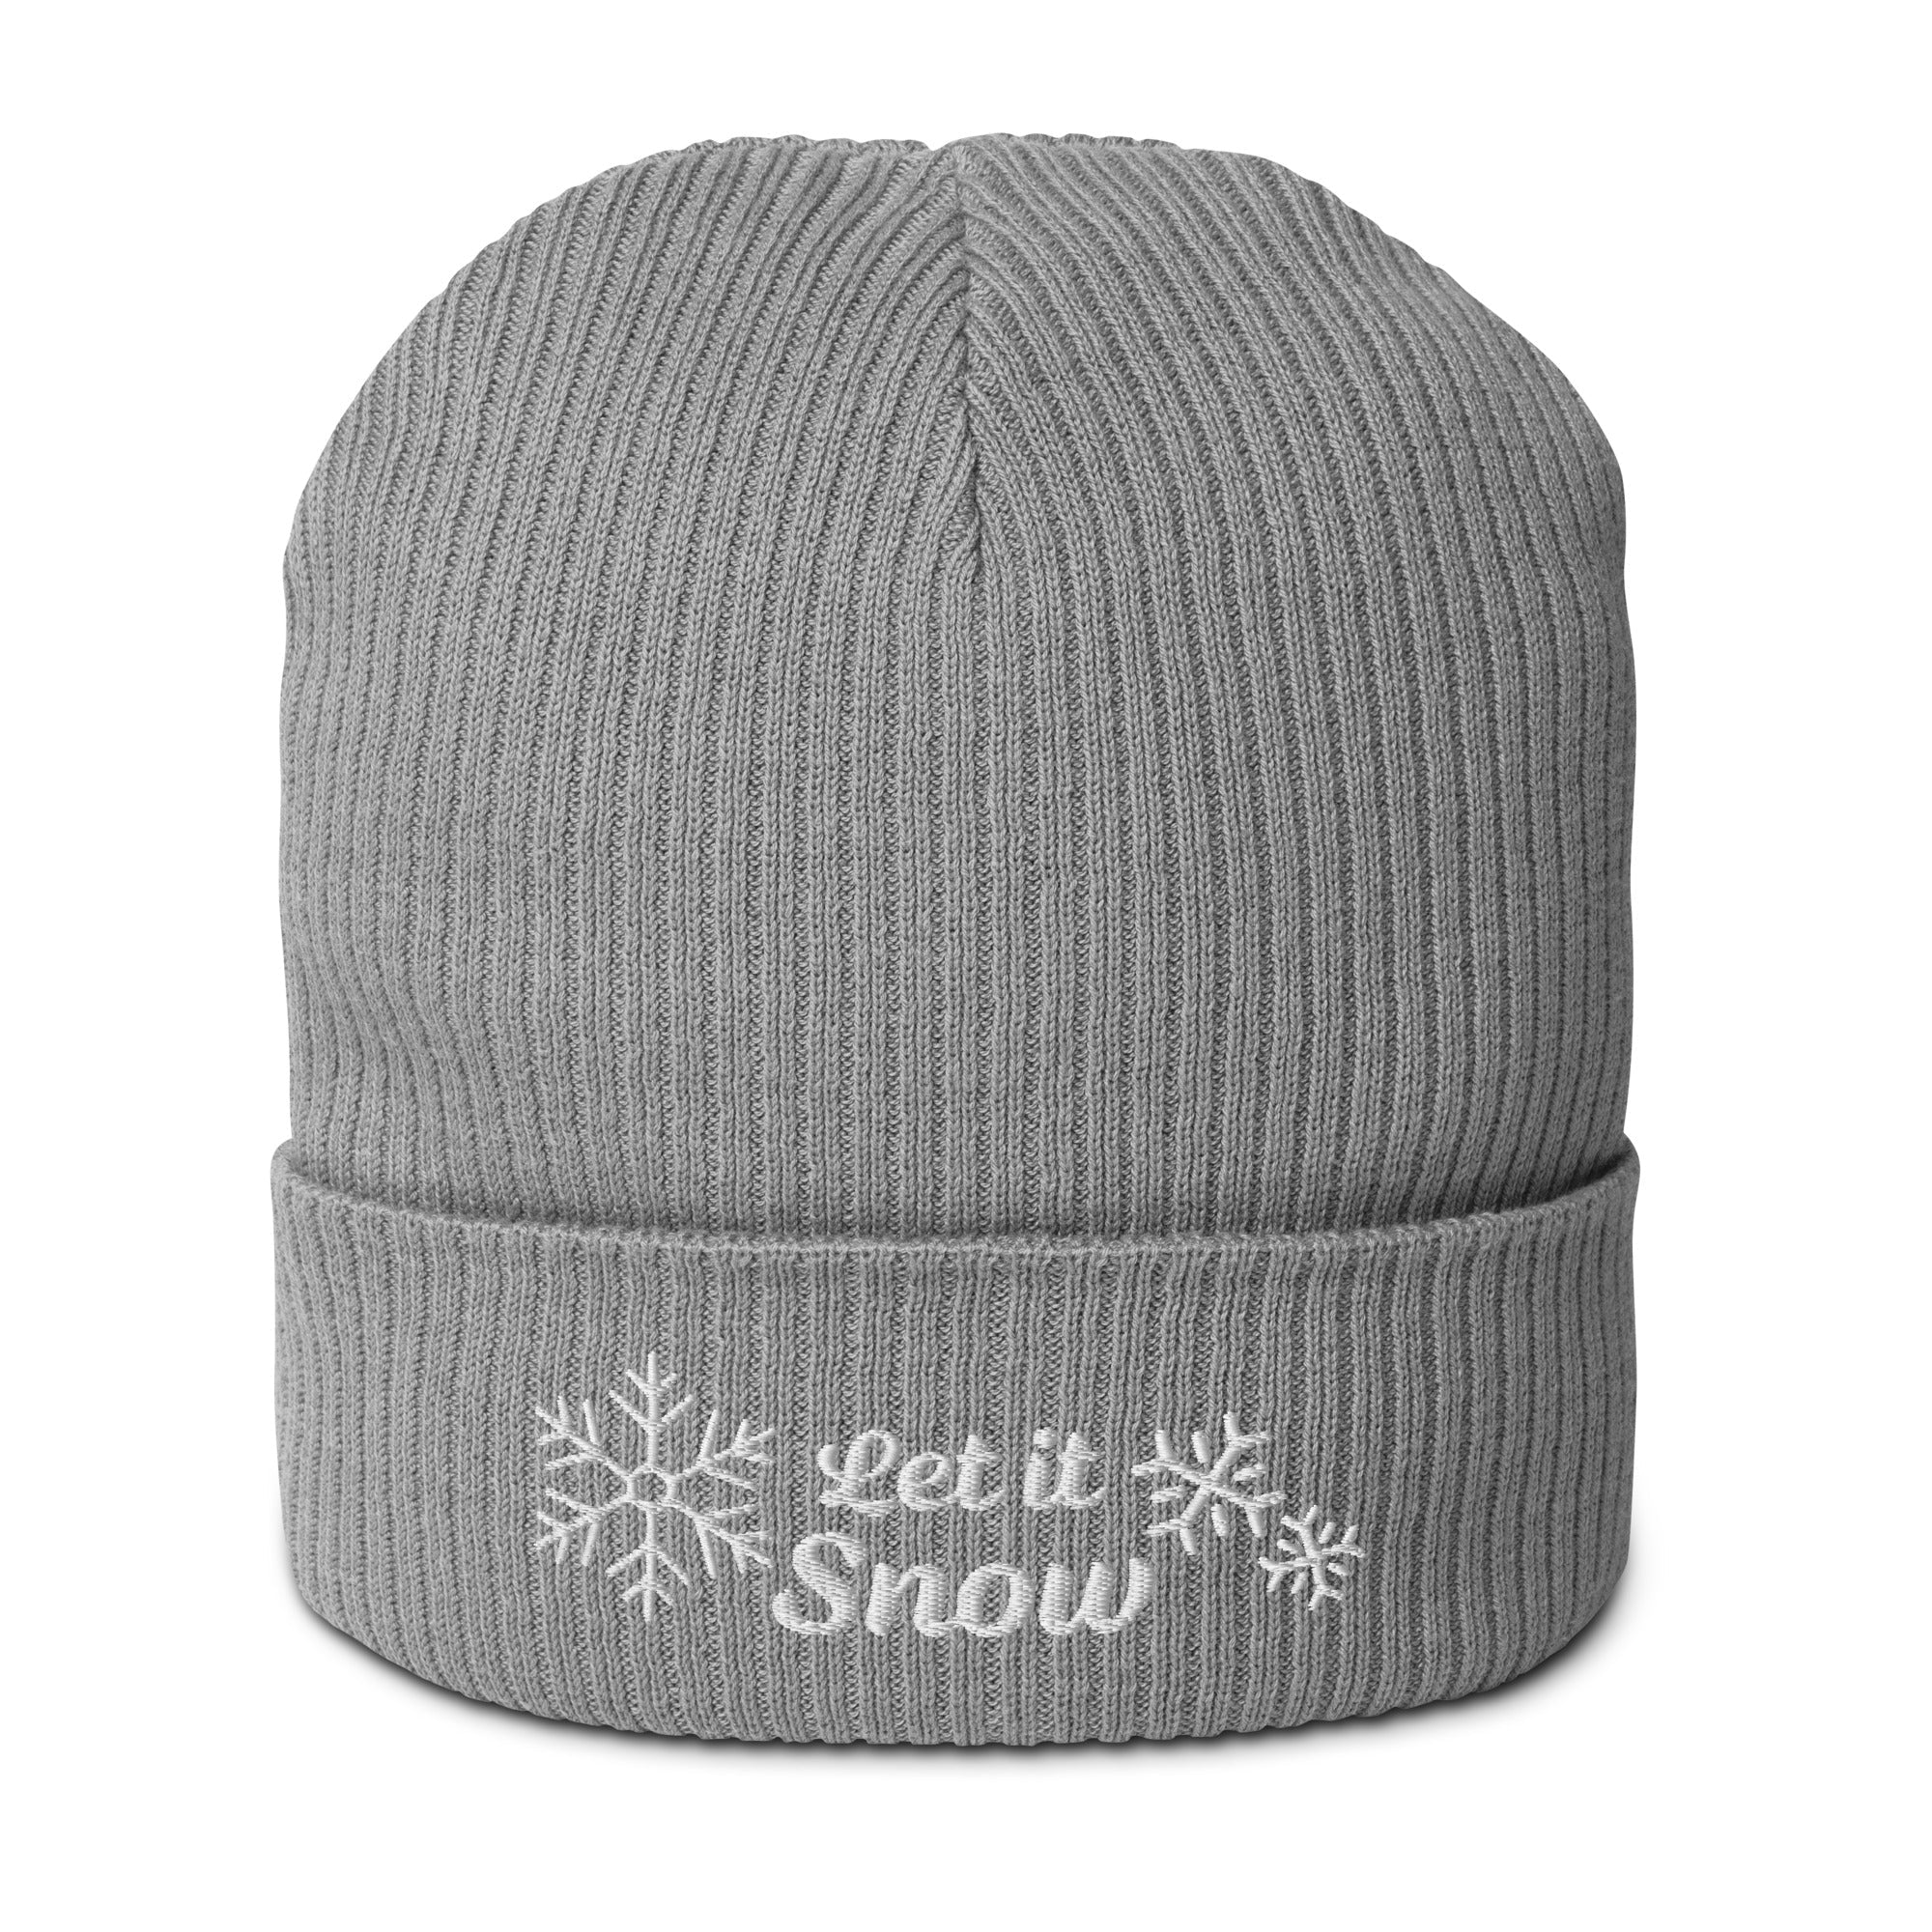 Let it snow embroidered organic ribbed beanie - cute gift idea for Christmas, for winter-10